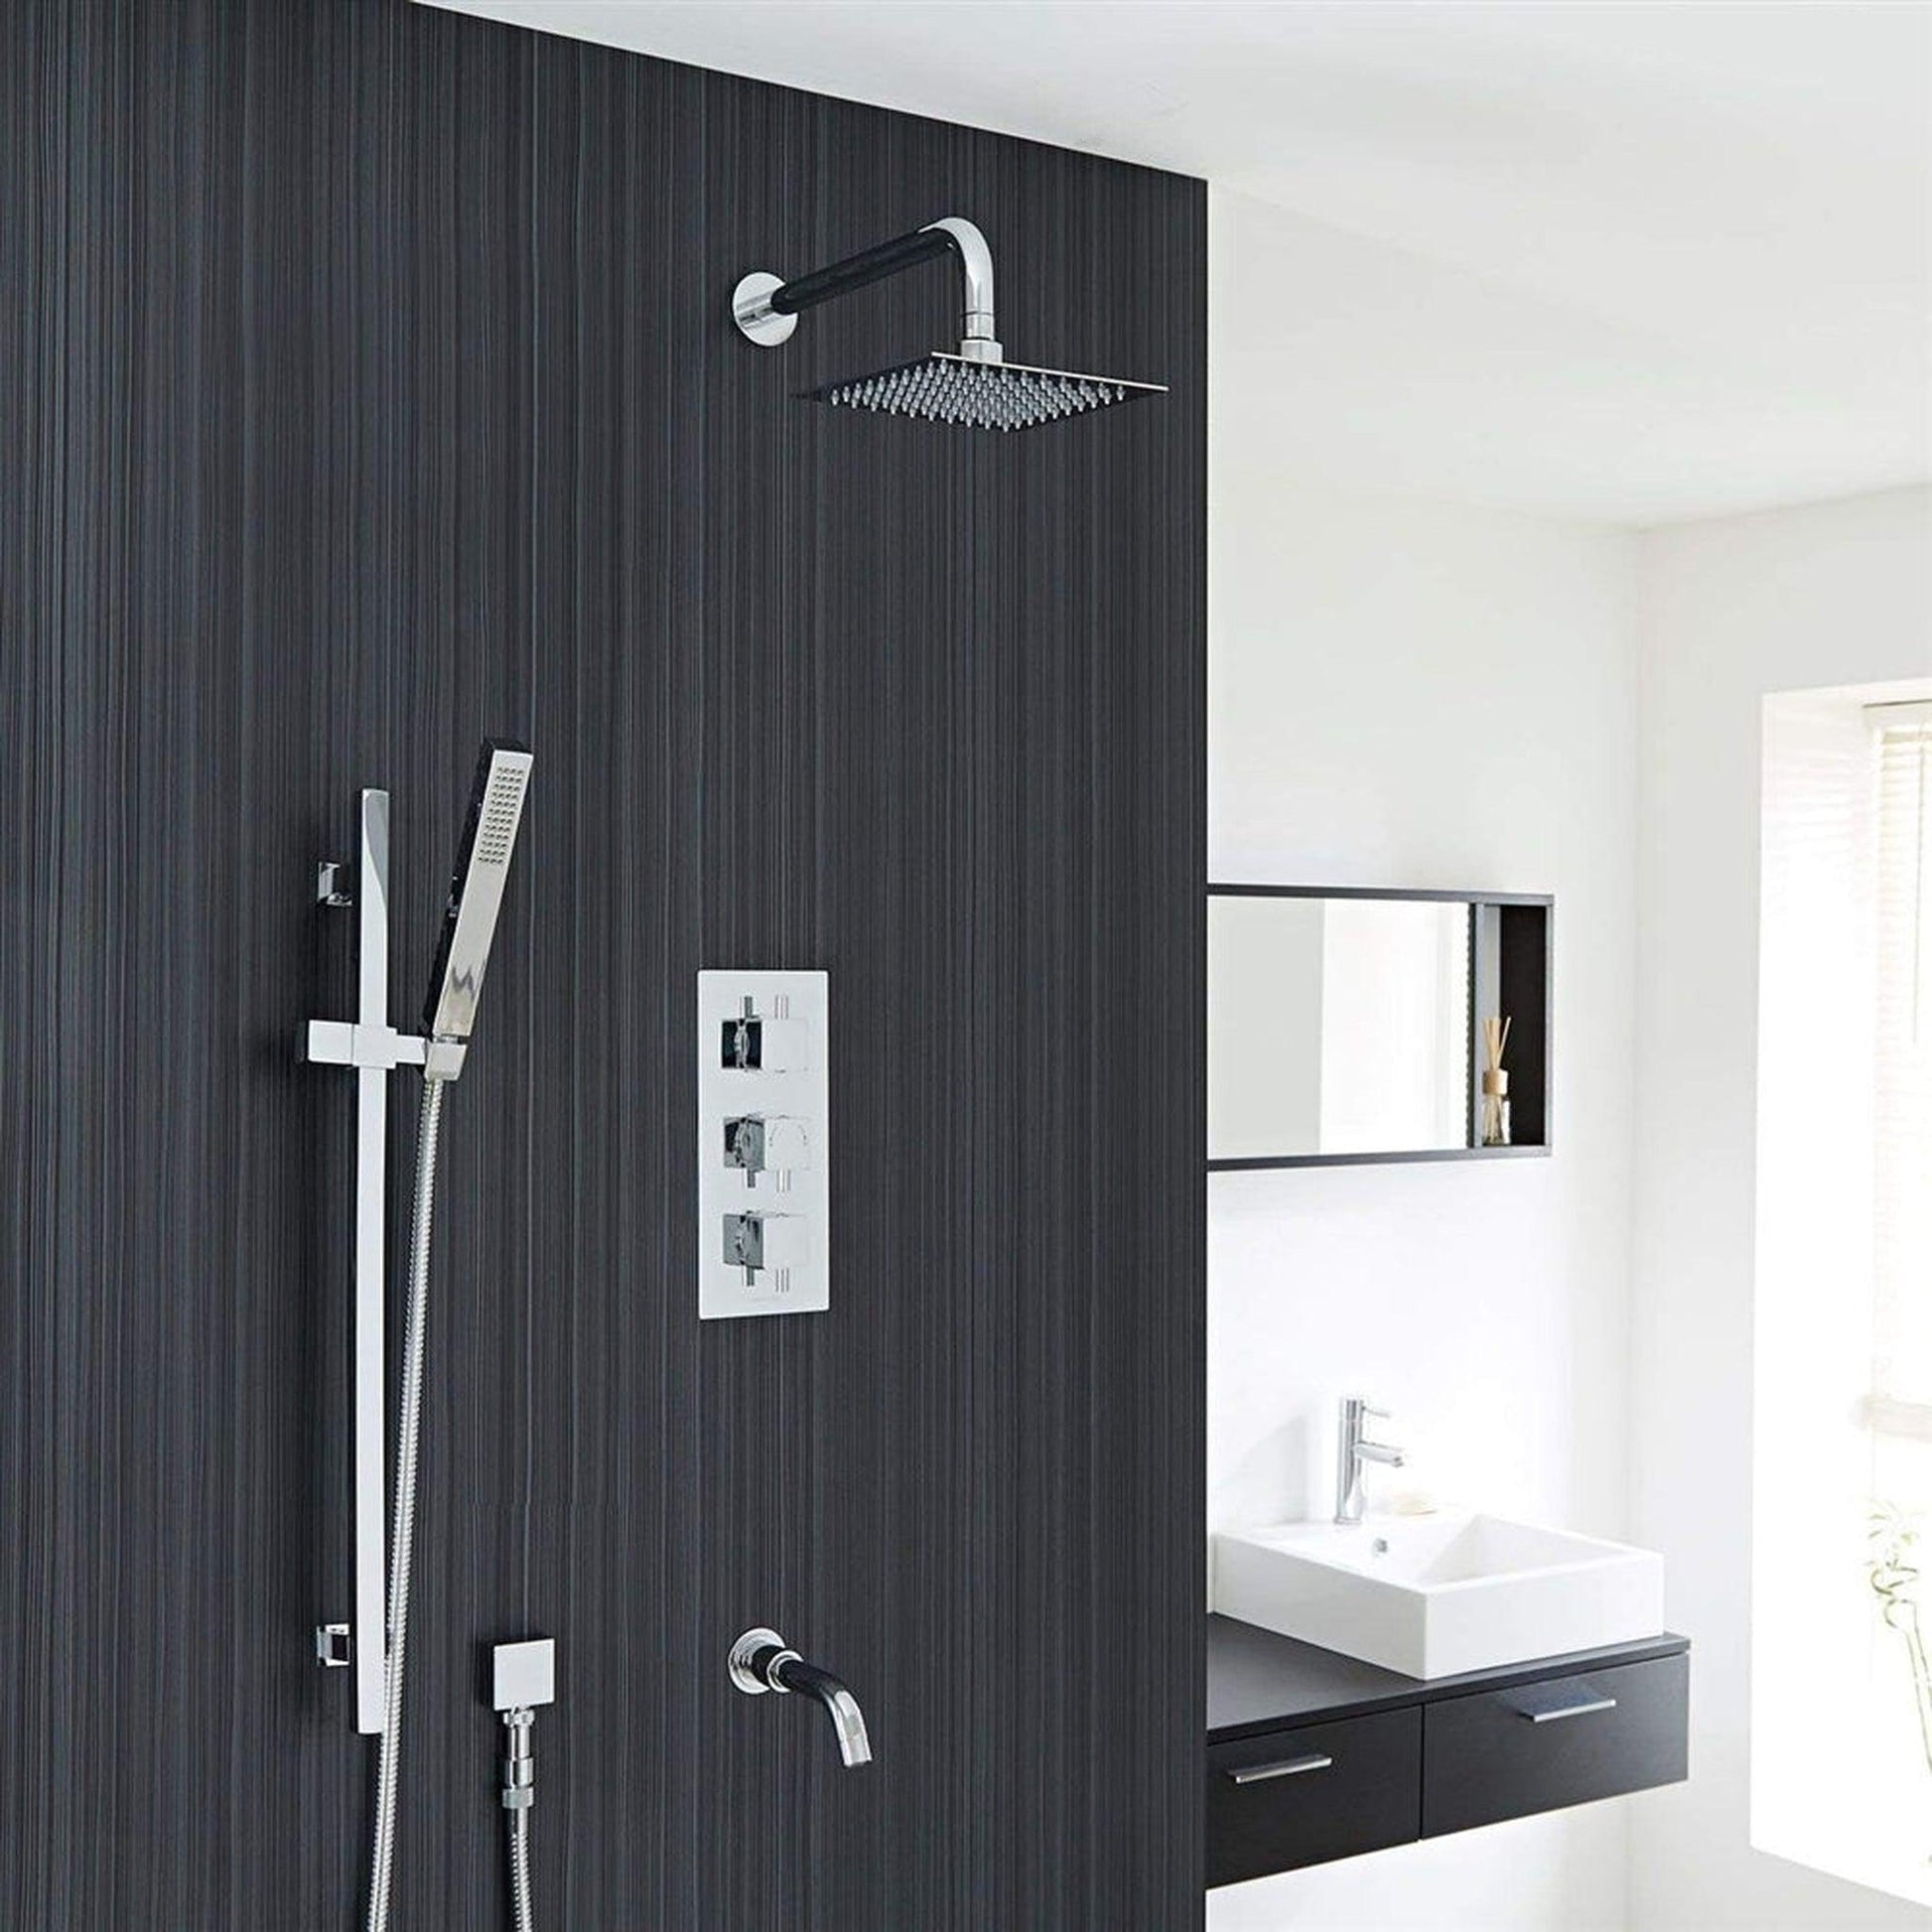 Fontana Liverpool Chrome 8" Wall-Mounted Thermostatic Rainfall Shower System With Water Powered LED Lights and Hand Shower